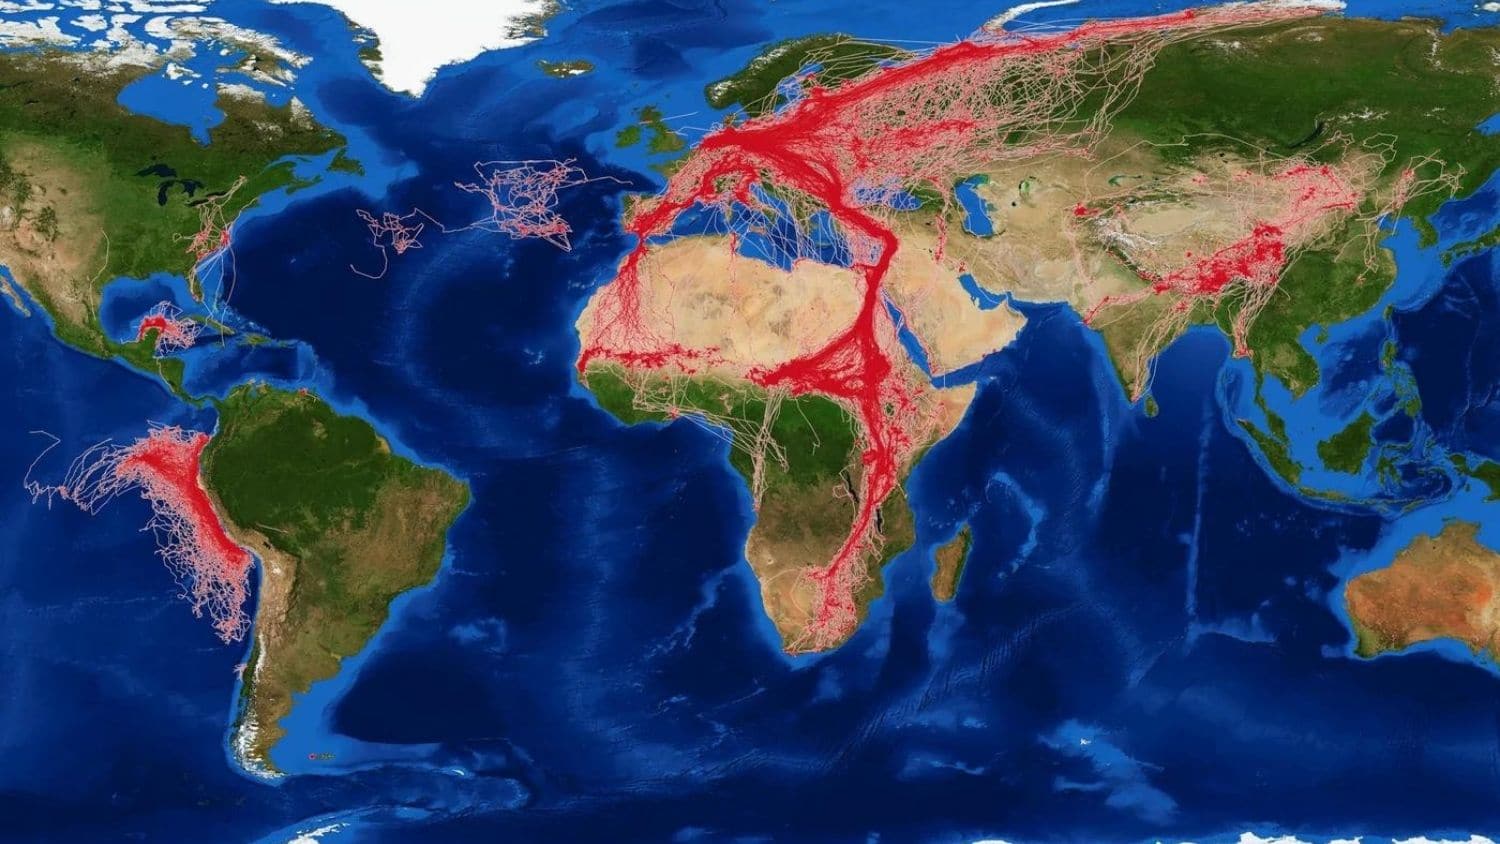 world map with red lines along w. coast of s. america, across europe, in Asia, and from the middle east south toward south africa